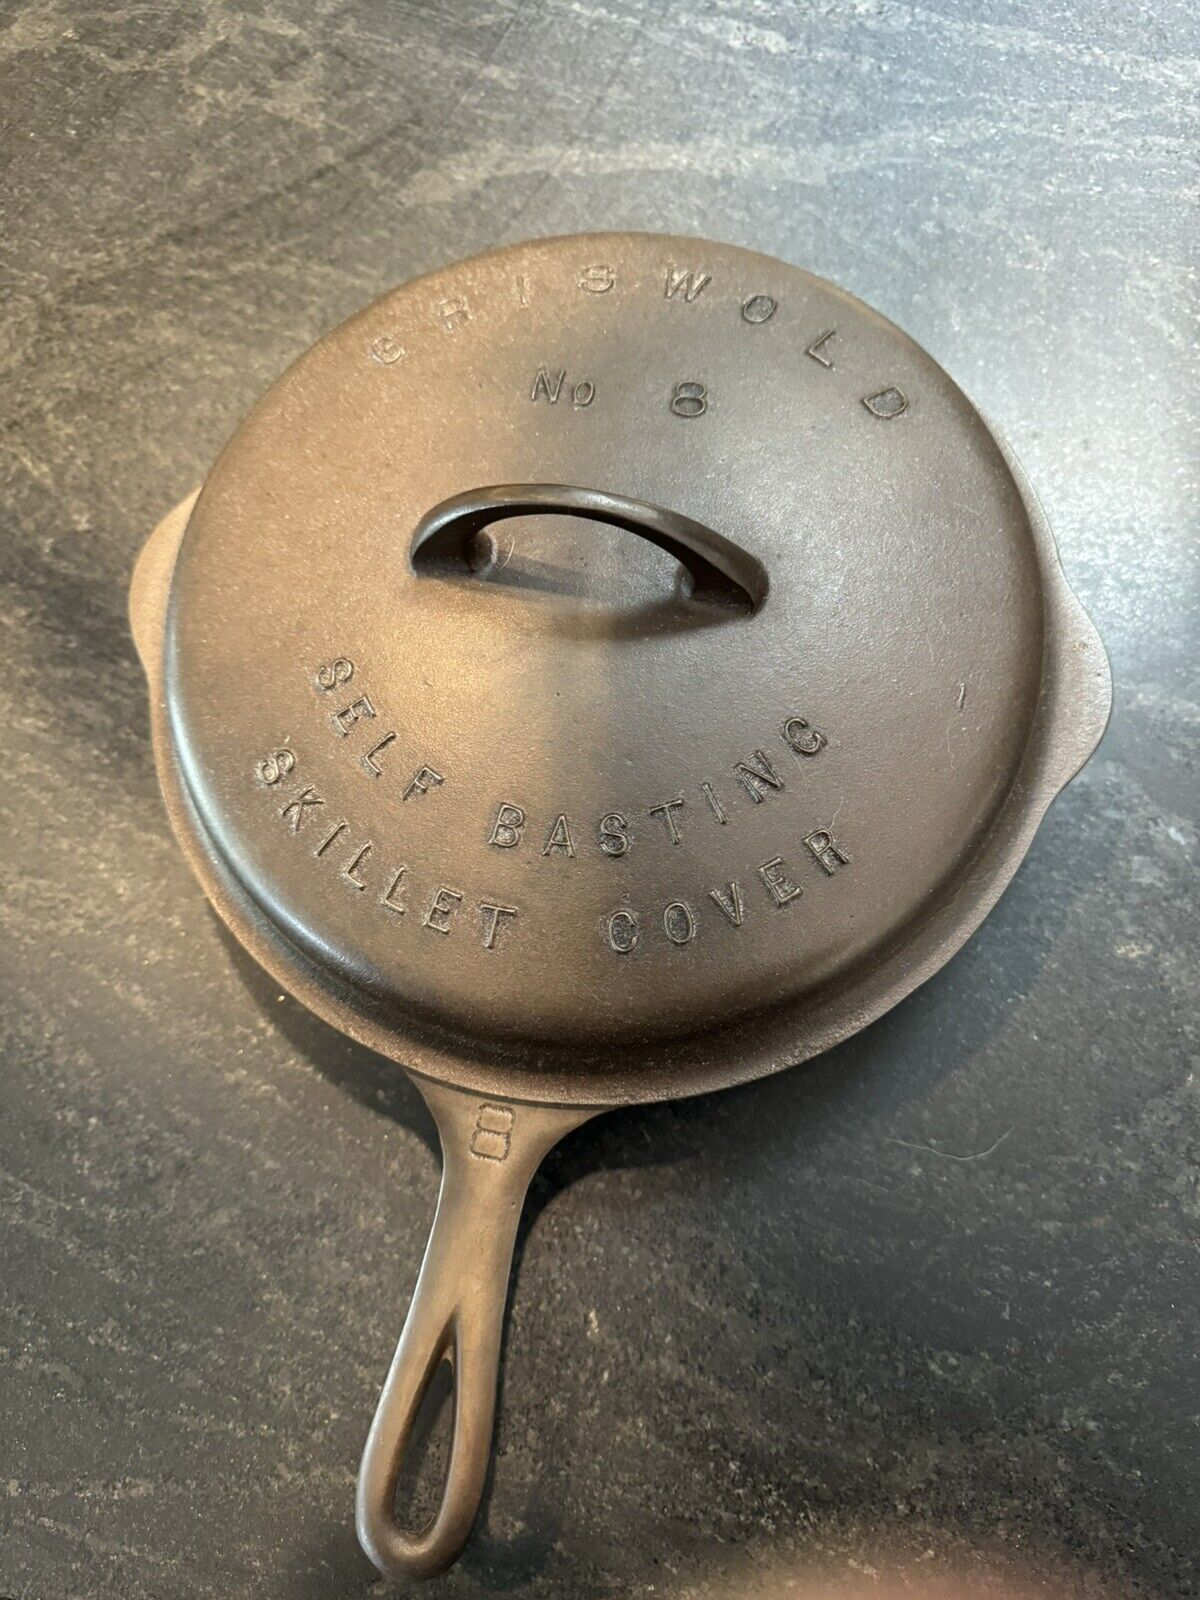 Griswold No. 8 Skillet and Lid